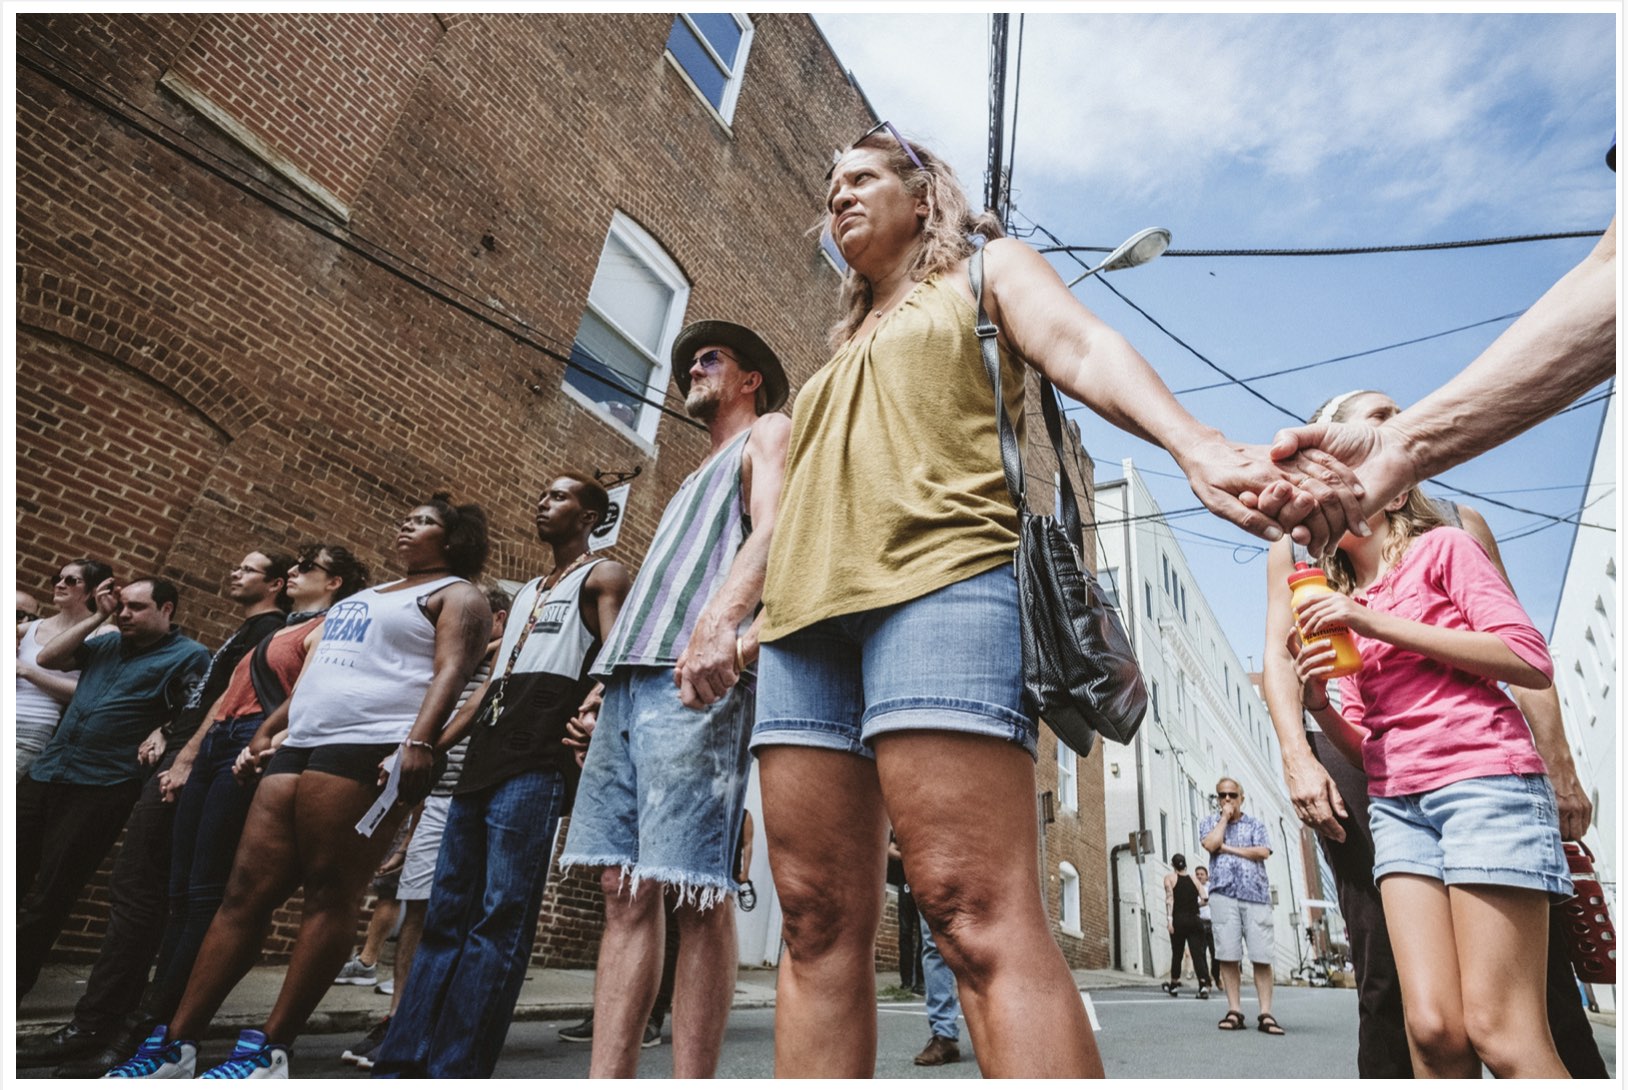 A multiracial crowd holds hands in 4th Street, where Heather Heyer was killed in the 8/12/17 "A12" car attack